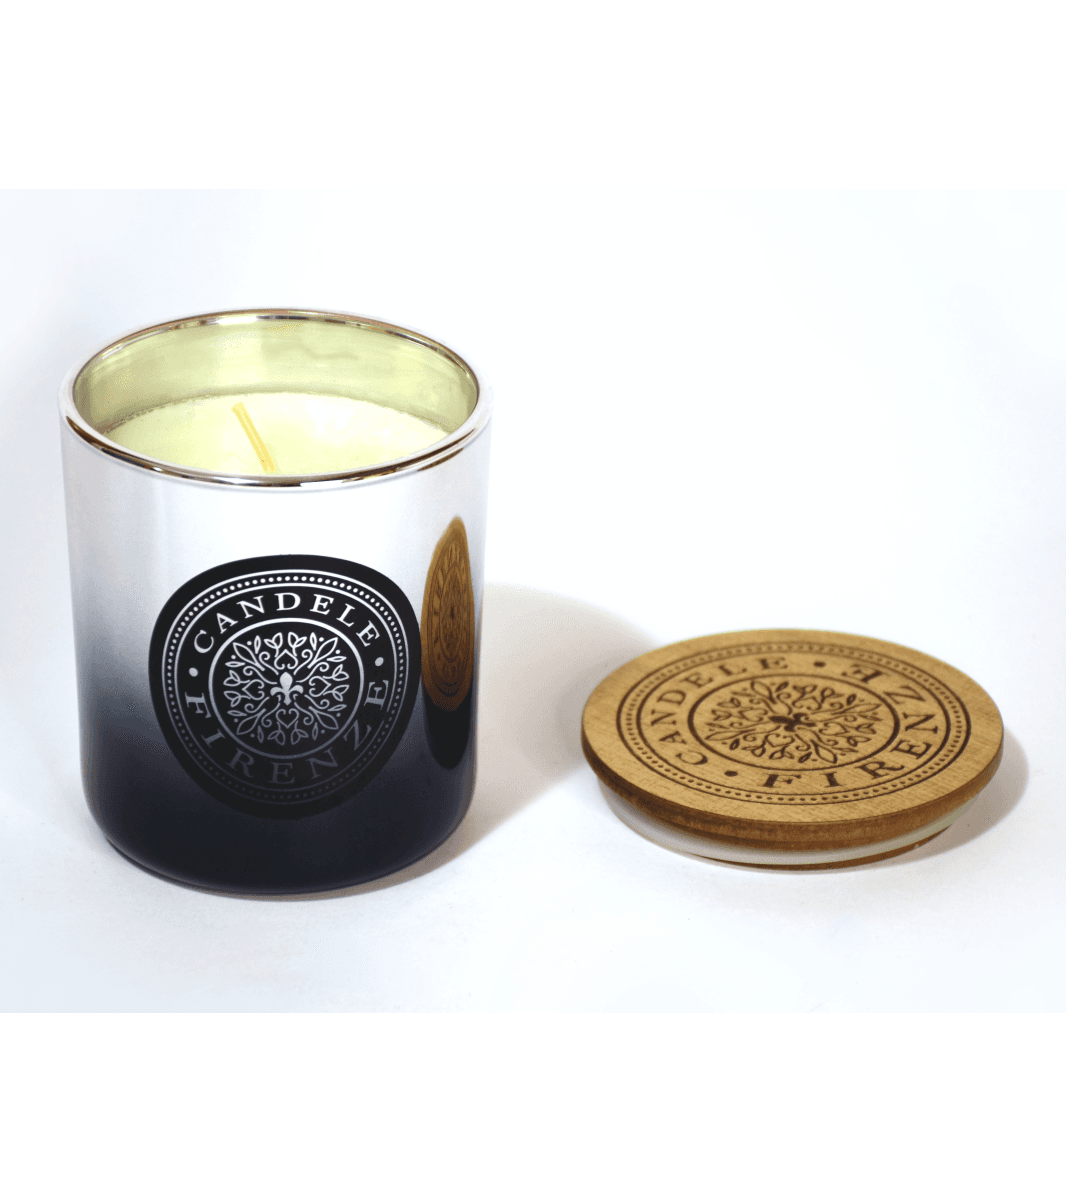 Selected image for CANDELE FIRENZE Свеќа Glass (металик сребрена засенчена)